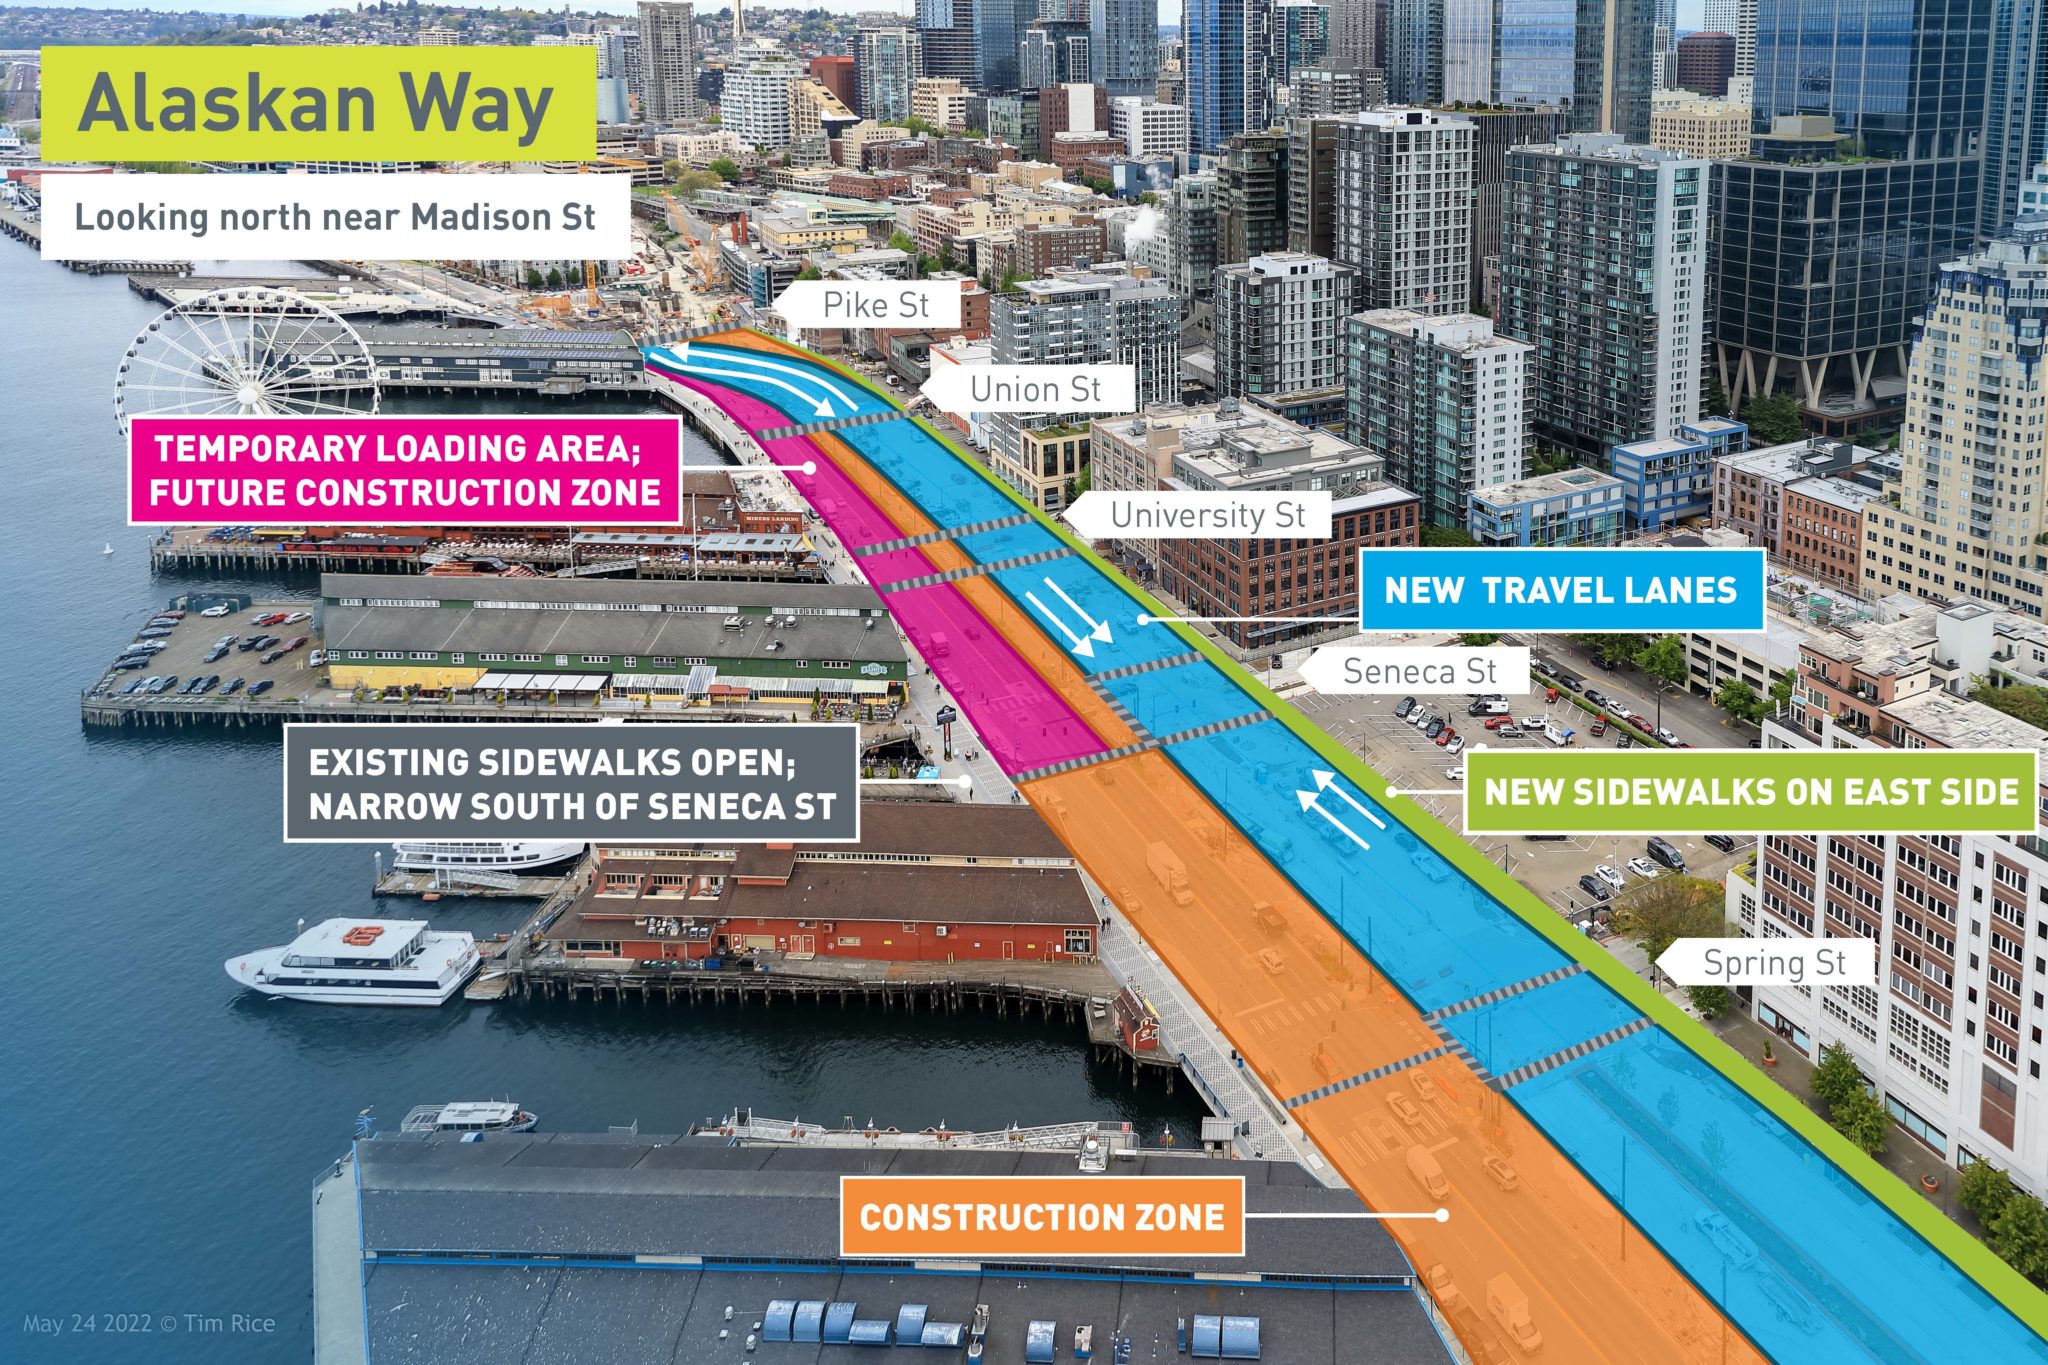 This graphic shows what Alaskan Way, looking northeast near Madison St, will look like following the traffic shift. It includes, from left to right (or west to east), there is the existing sidewalk, construction work zone south of Seneca St and temporary loading area north of Seneca St, new southbound travel lanes, new northbound travel lanes and new sidewalks on the east side. The graphic uses different colors to depict each area along Alaskan Way.